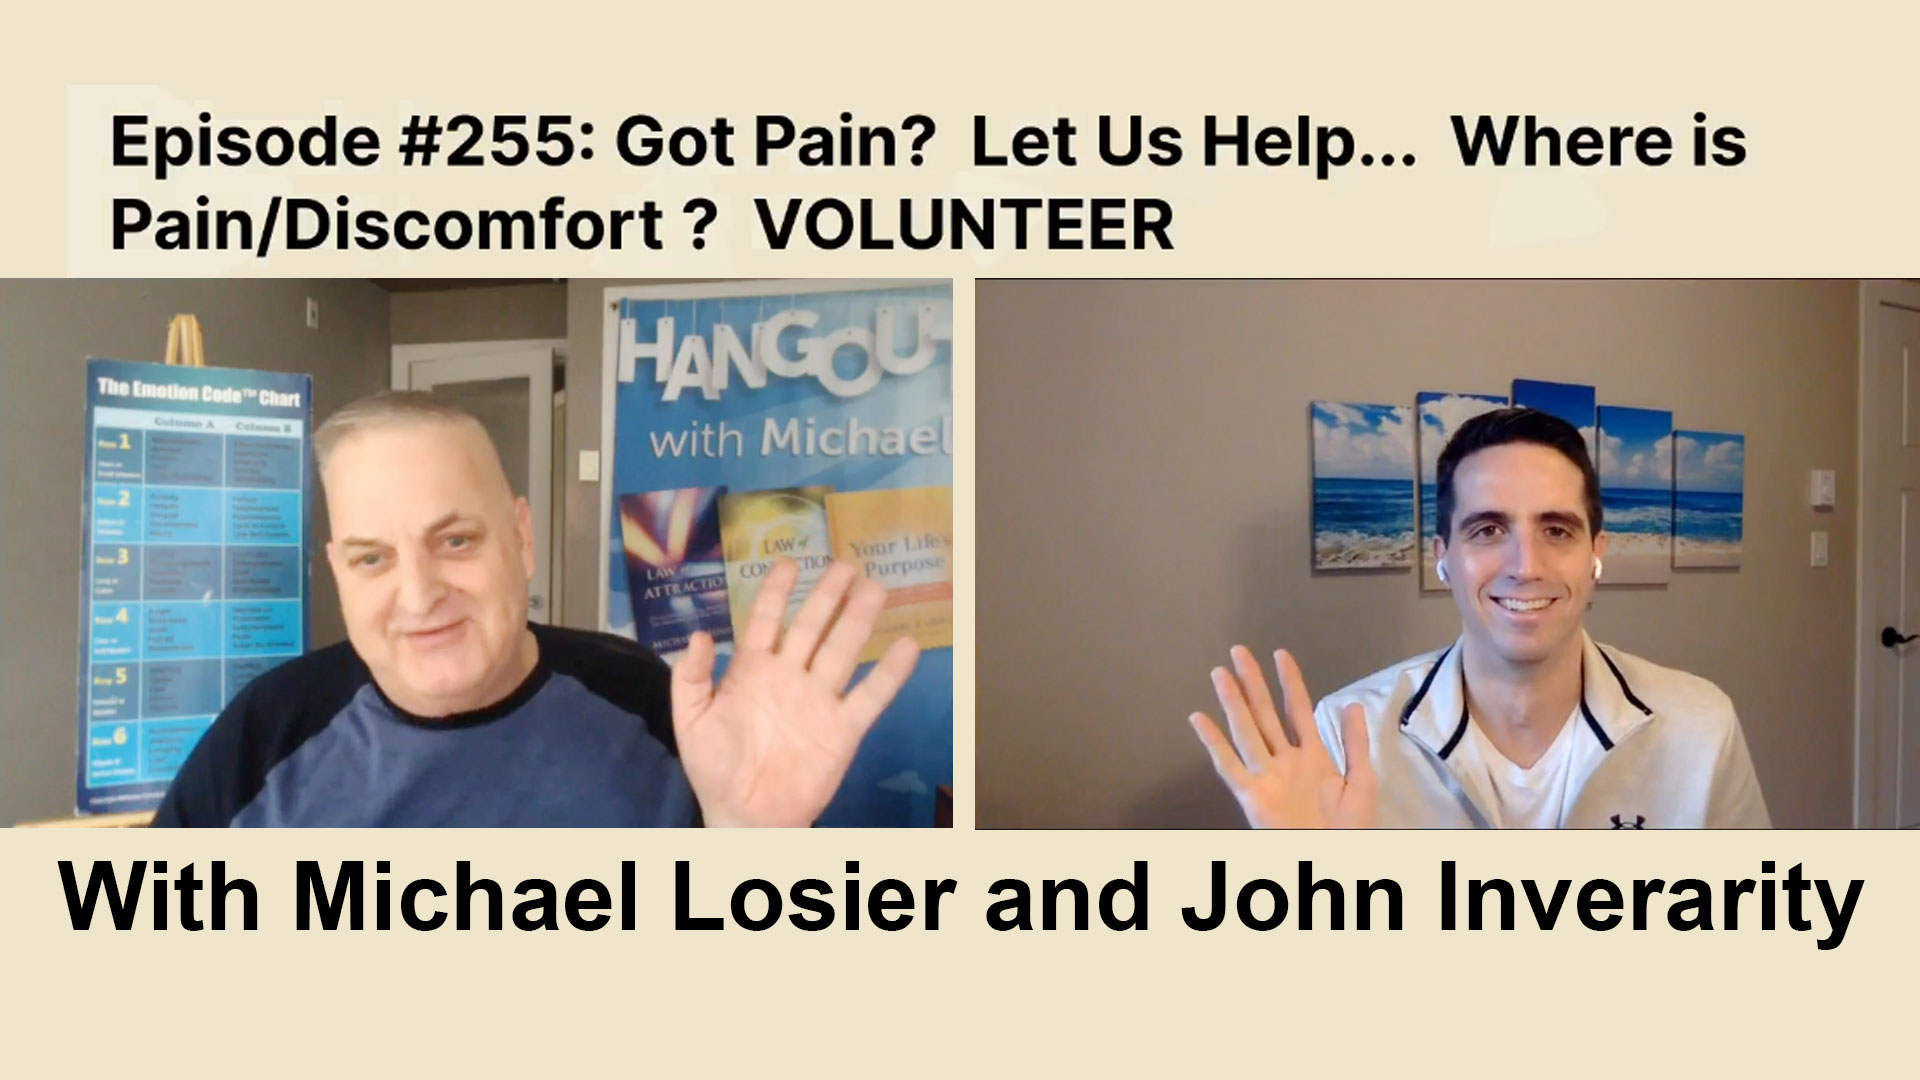 Episode #255 Got Pain? Let Us Help… Where is Pain/Discomfort?